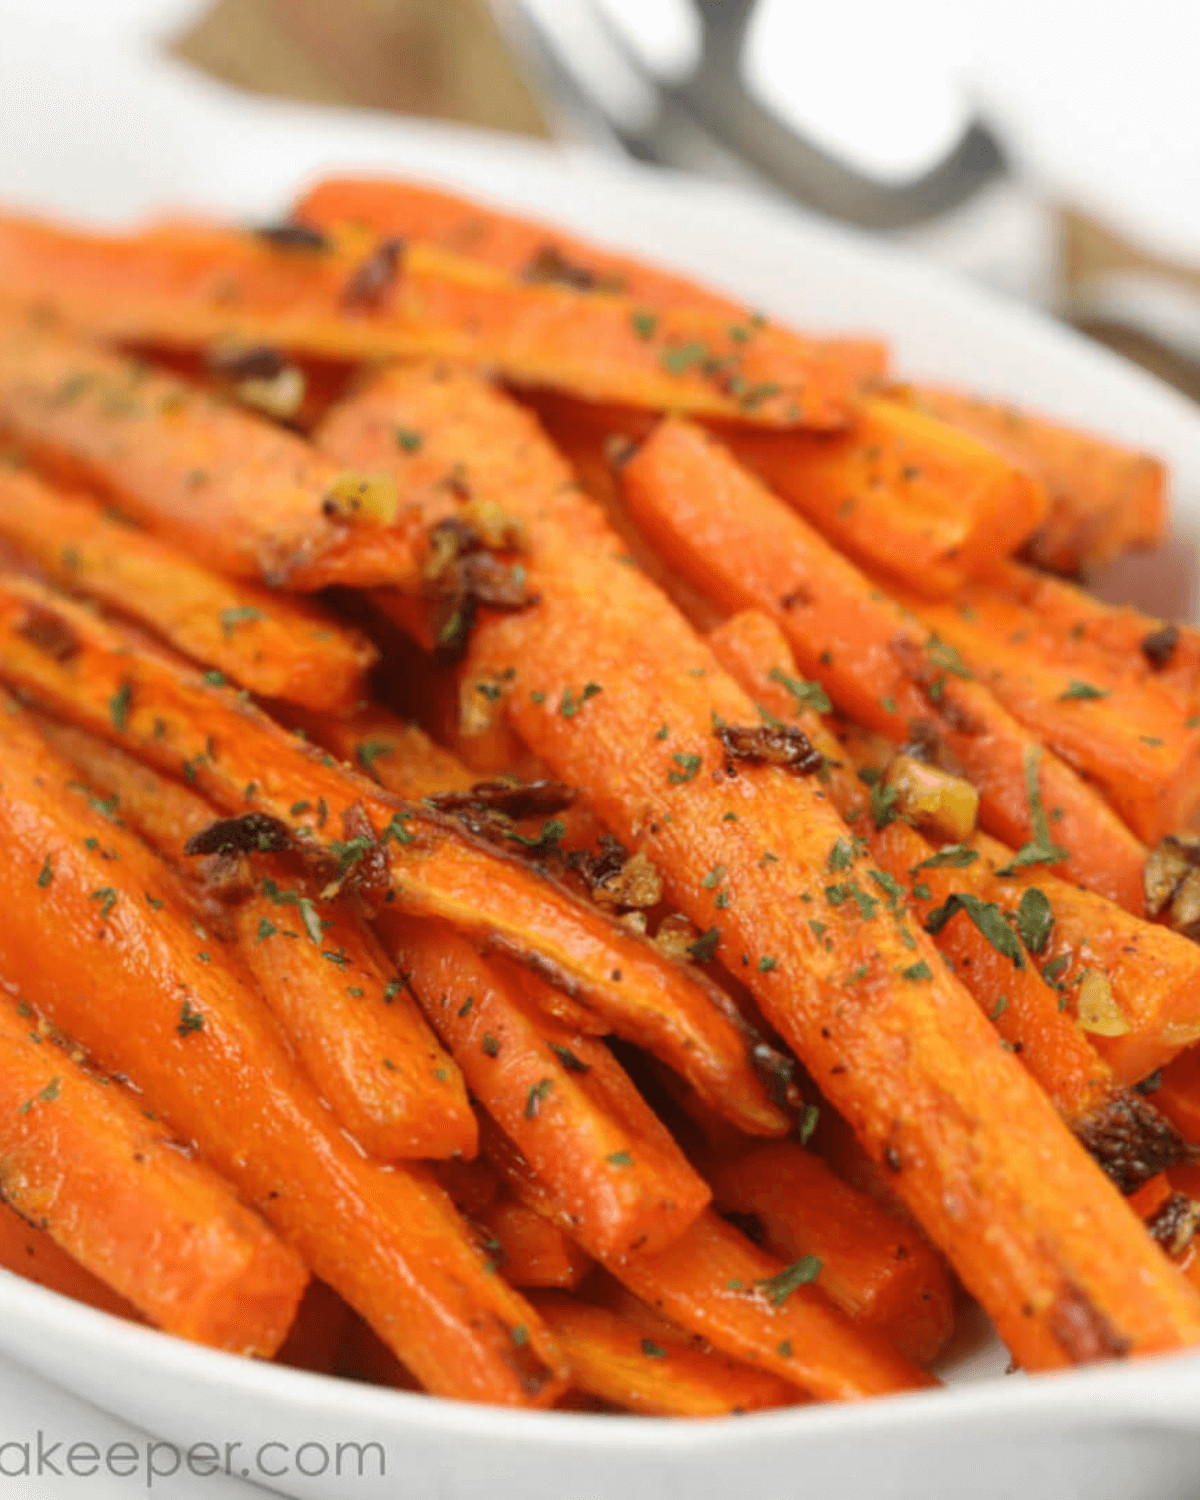 A platter of oven roasted honey garlic baby carrots.